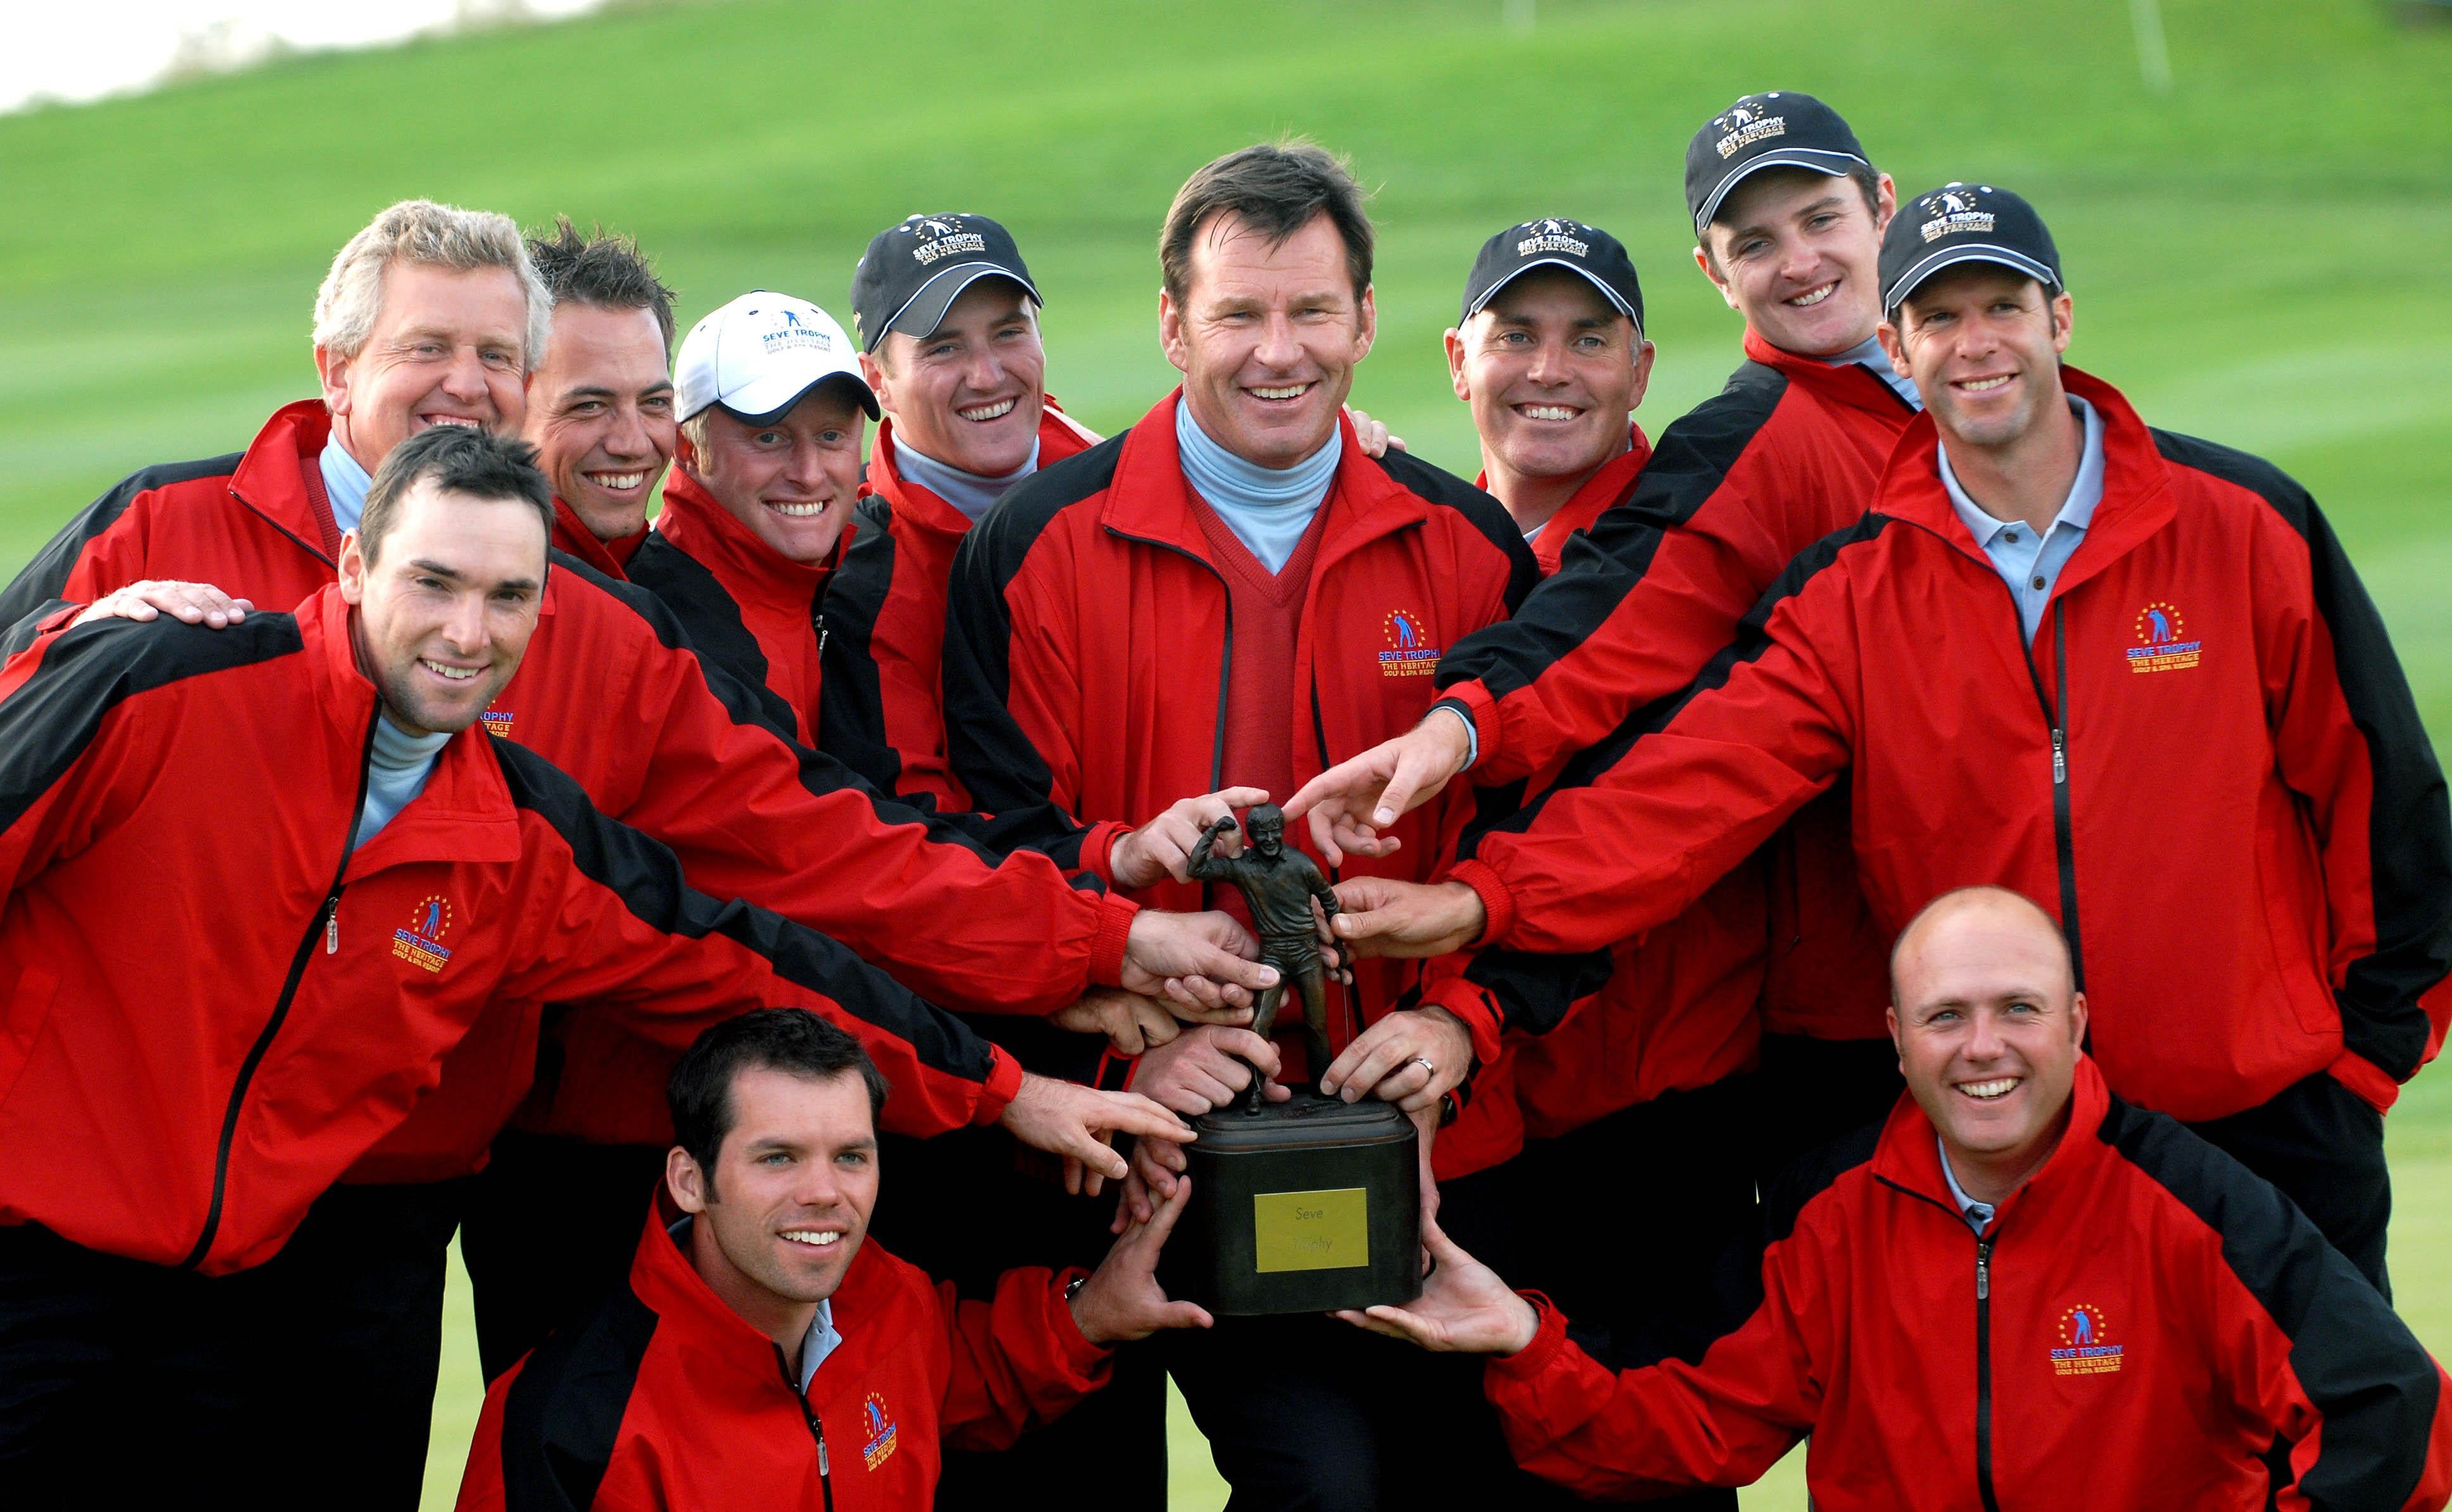 Great Britain and Ireland’s (clockwise from left) Paul Casey, Oliver Wilson, Colin Montgomerie, Nick Dougherty, Simon Dyson, Marc Warren, team captain Nick Faldo, Philip Archer, Justin Rose, Bradley Dredge and Graeme Storm after winning the Seve Trophy at The Heritage Golf & Spa Resort, Killenard, Ireland (PA)